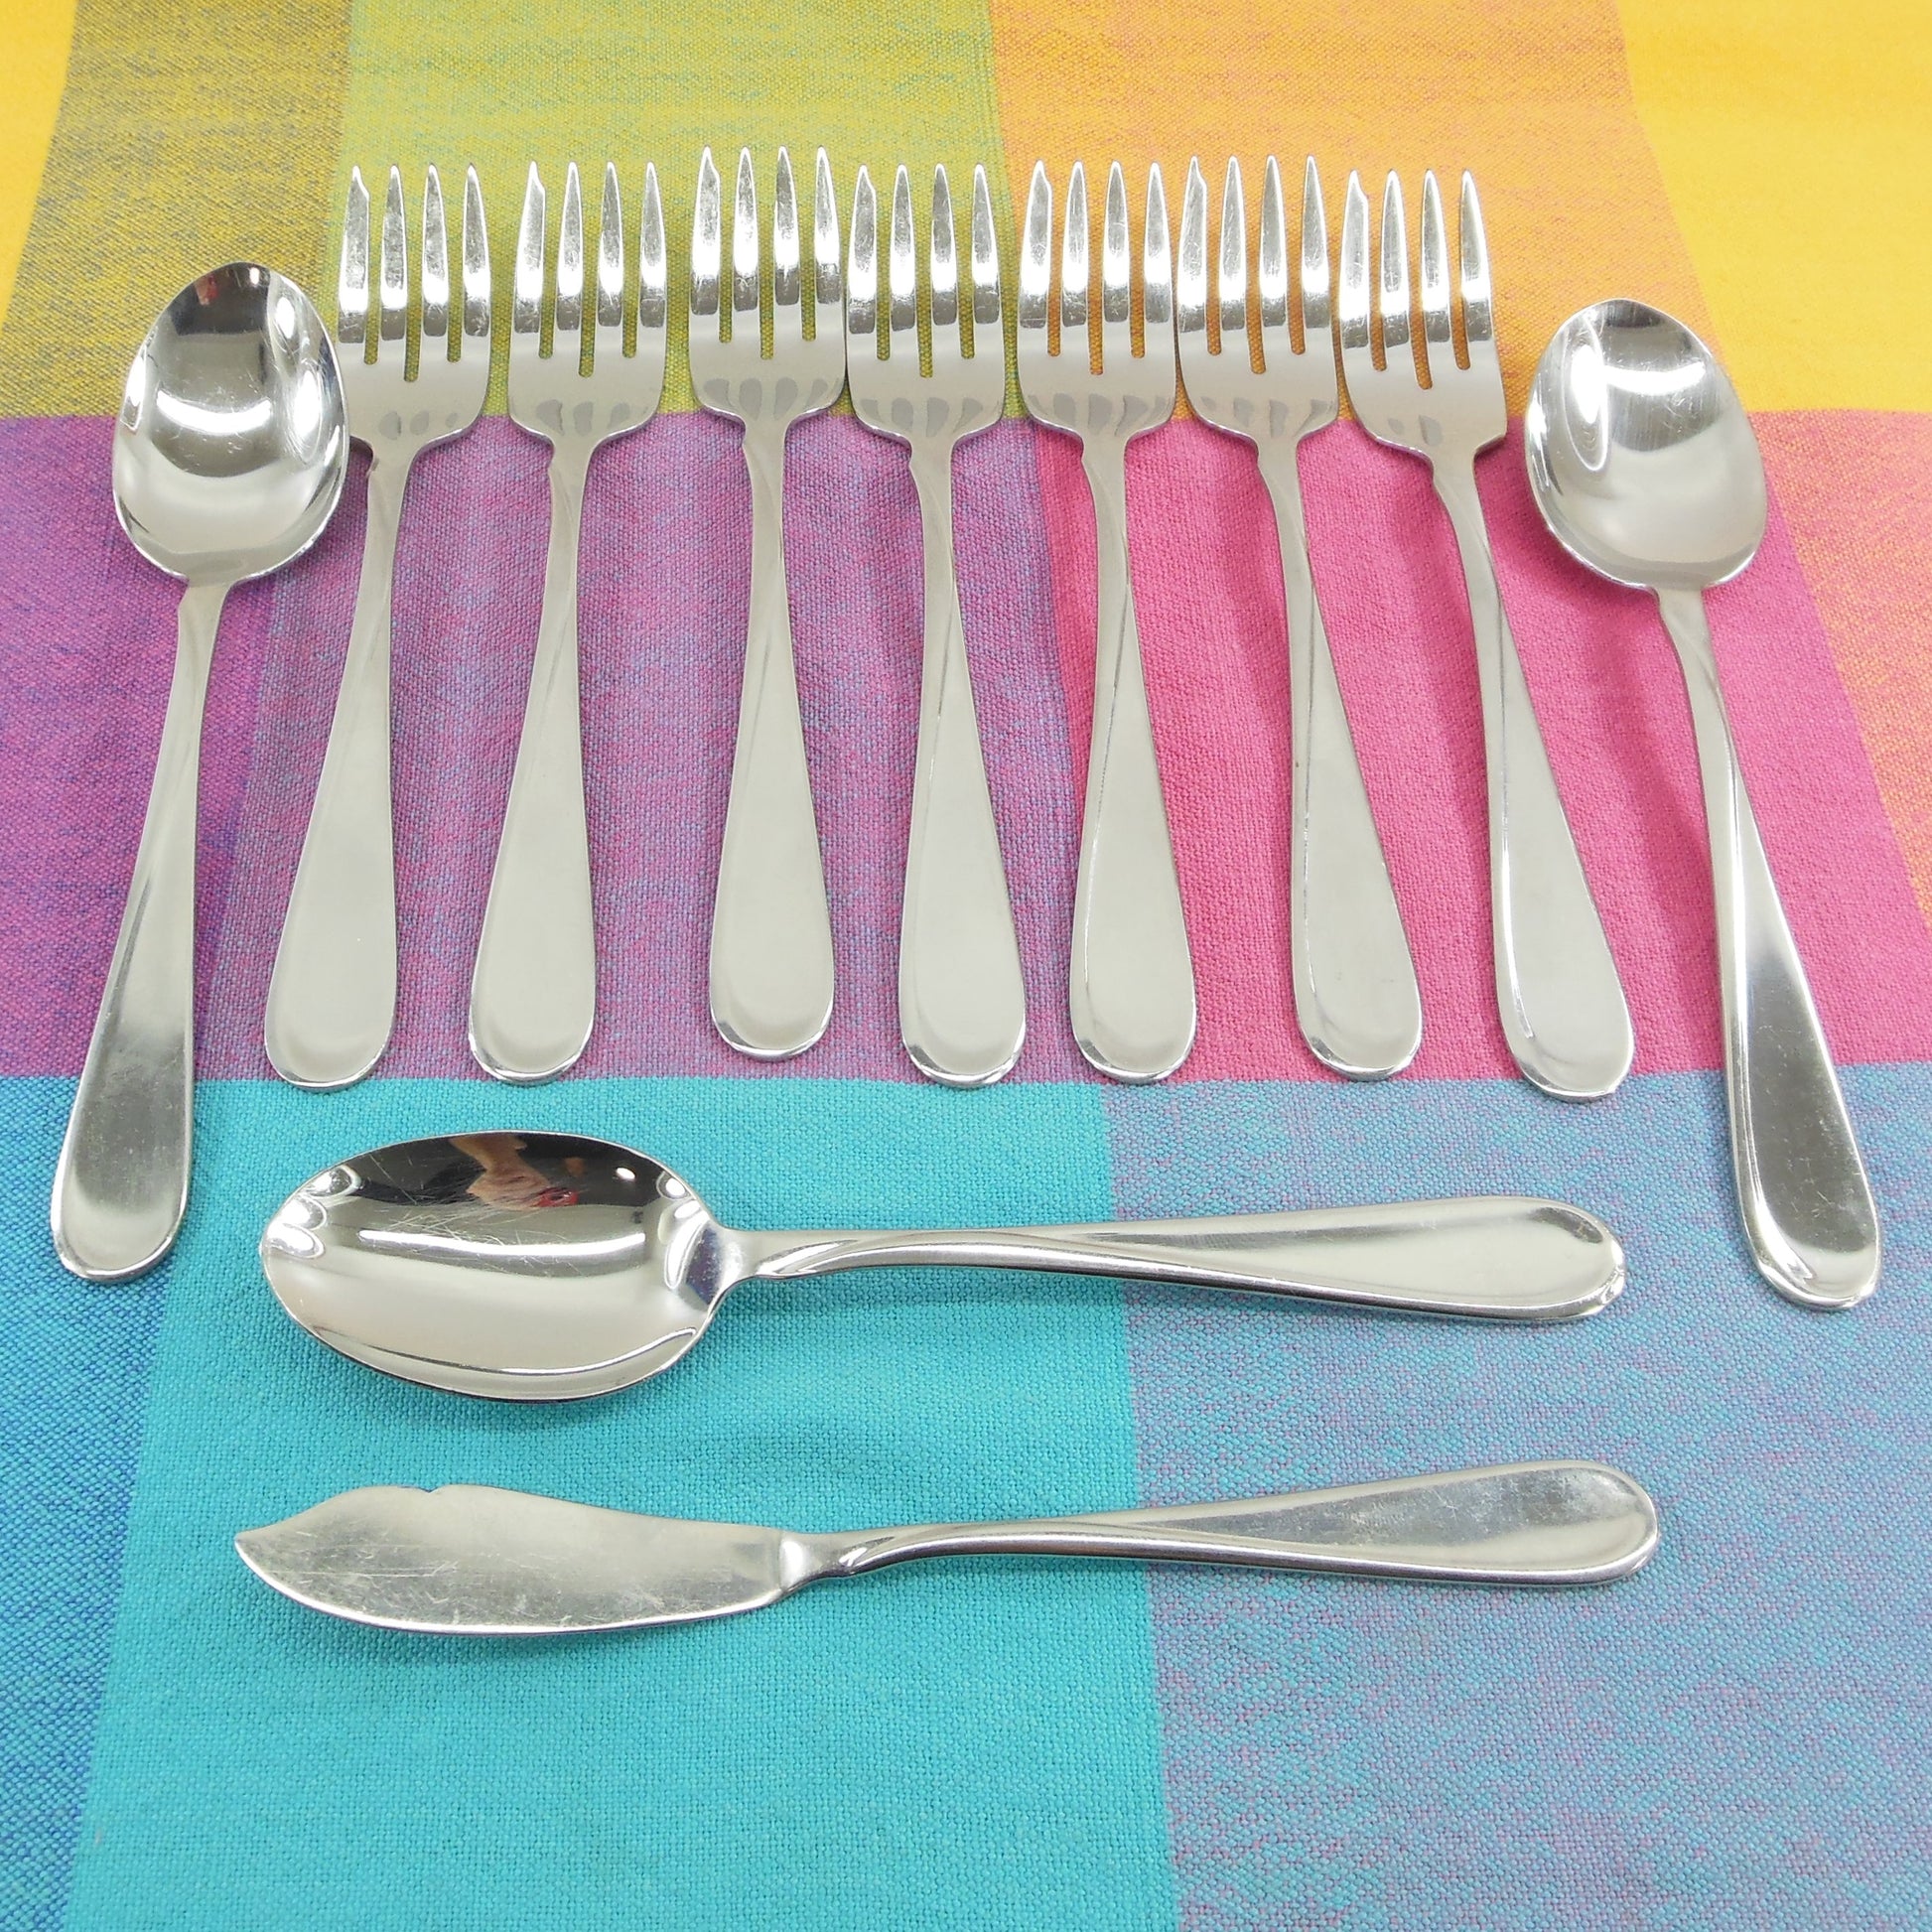 Oneida Flight Reliance USA Stainless Flatware - 7 Salad Forks, 3 Place Spoons, 1 Butter